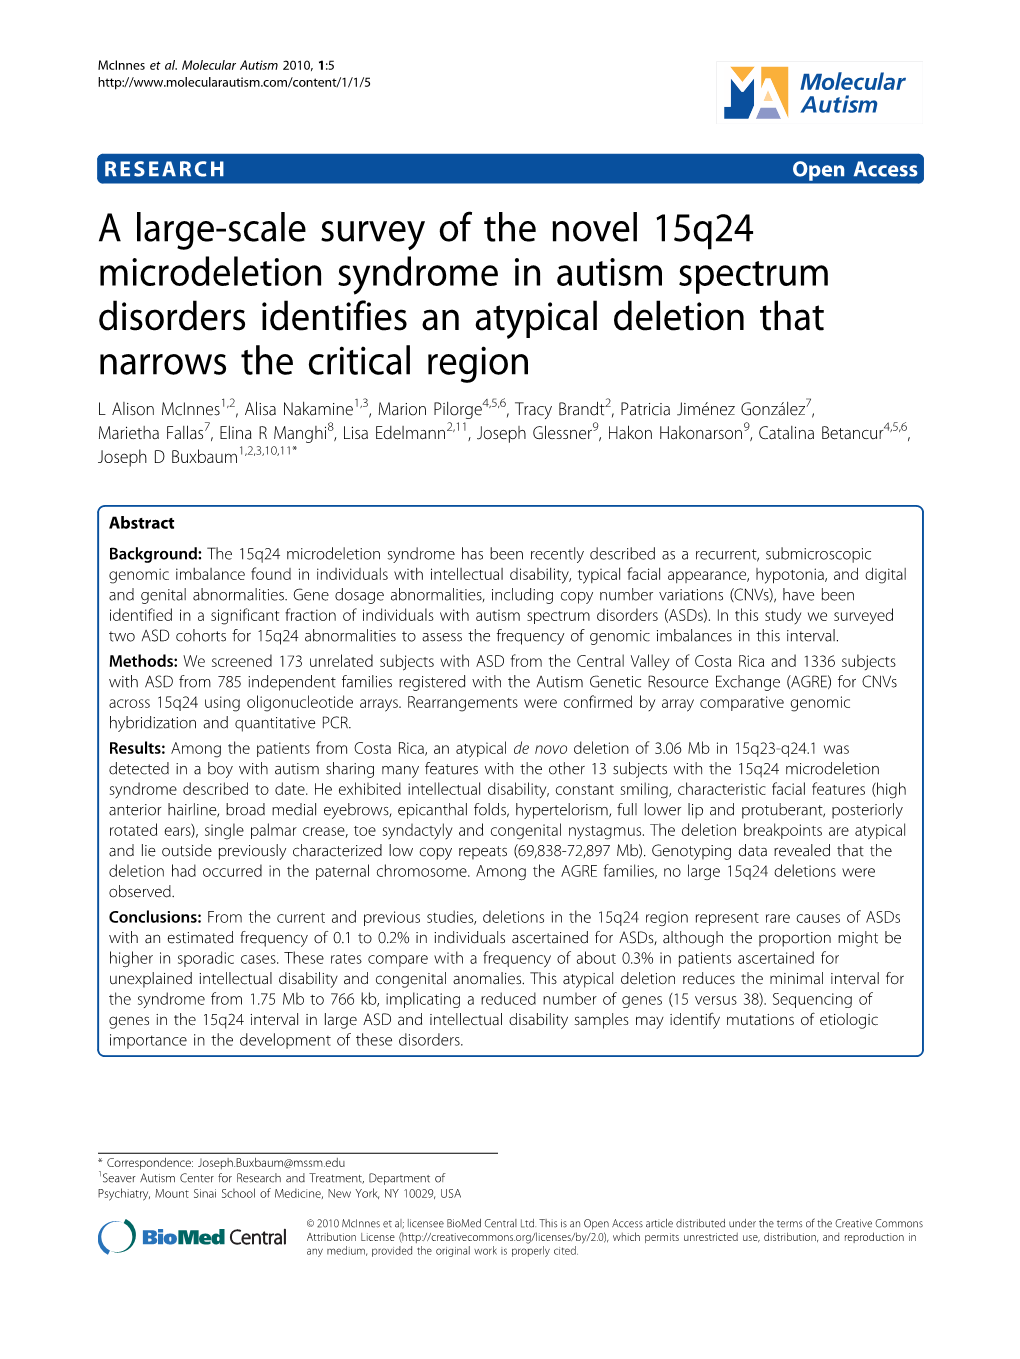 A Large-Scale Survey of the Novel 15Q24 Microdeletion Syndrome In